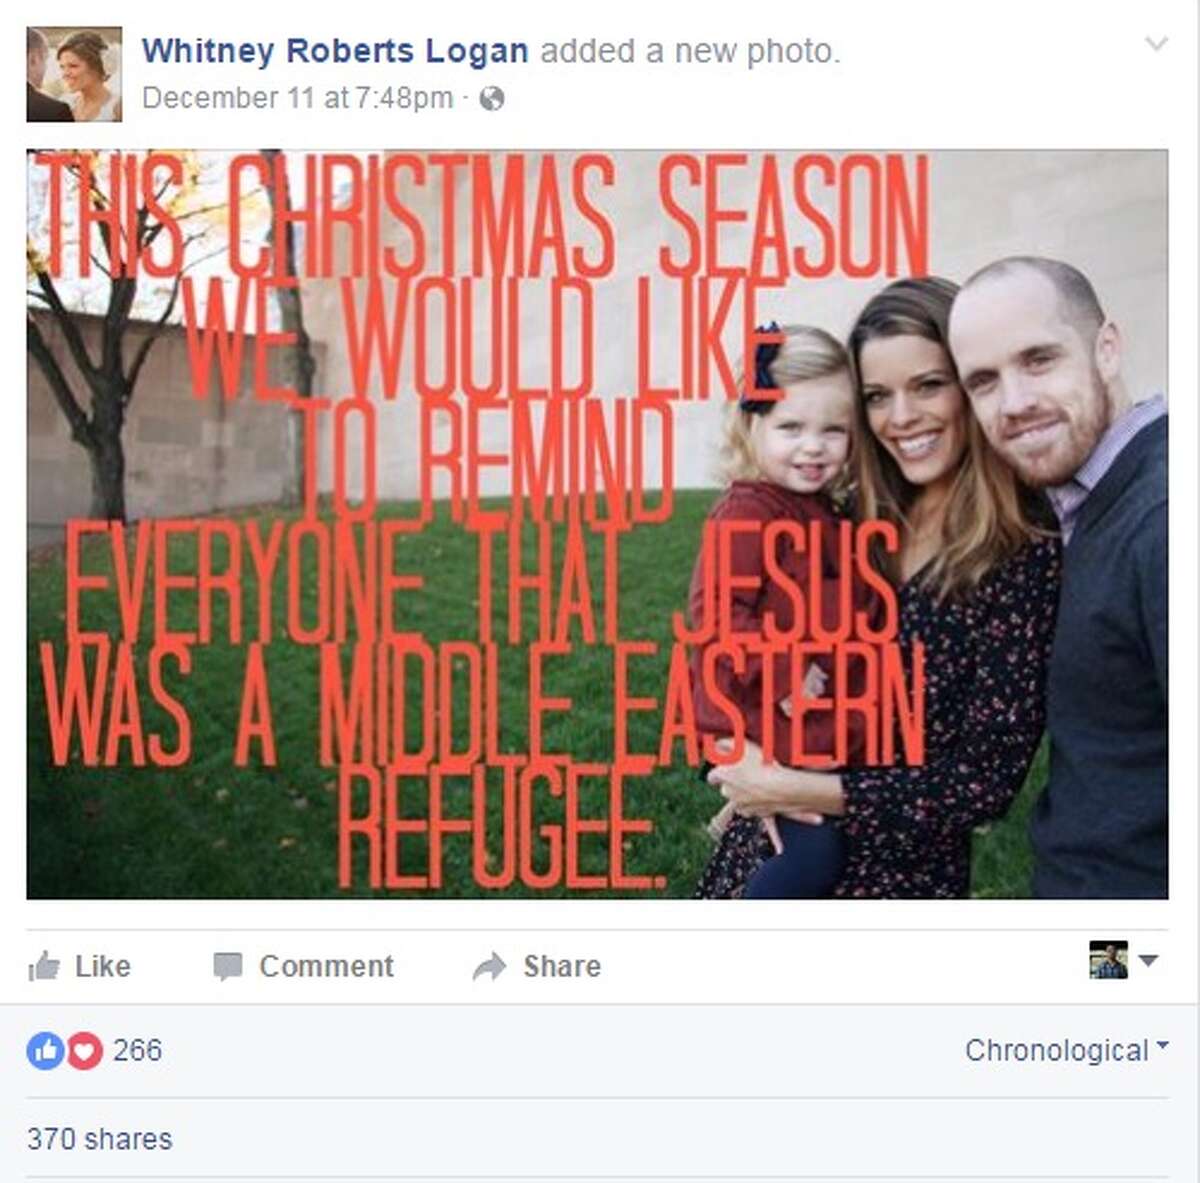 Whitney Logan's Christmas post about Jesus being a Middle Eastern refugee has gone viral, attracting 370 shares and 266 reactions as of Friday. Image source: Facebook